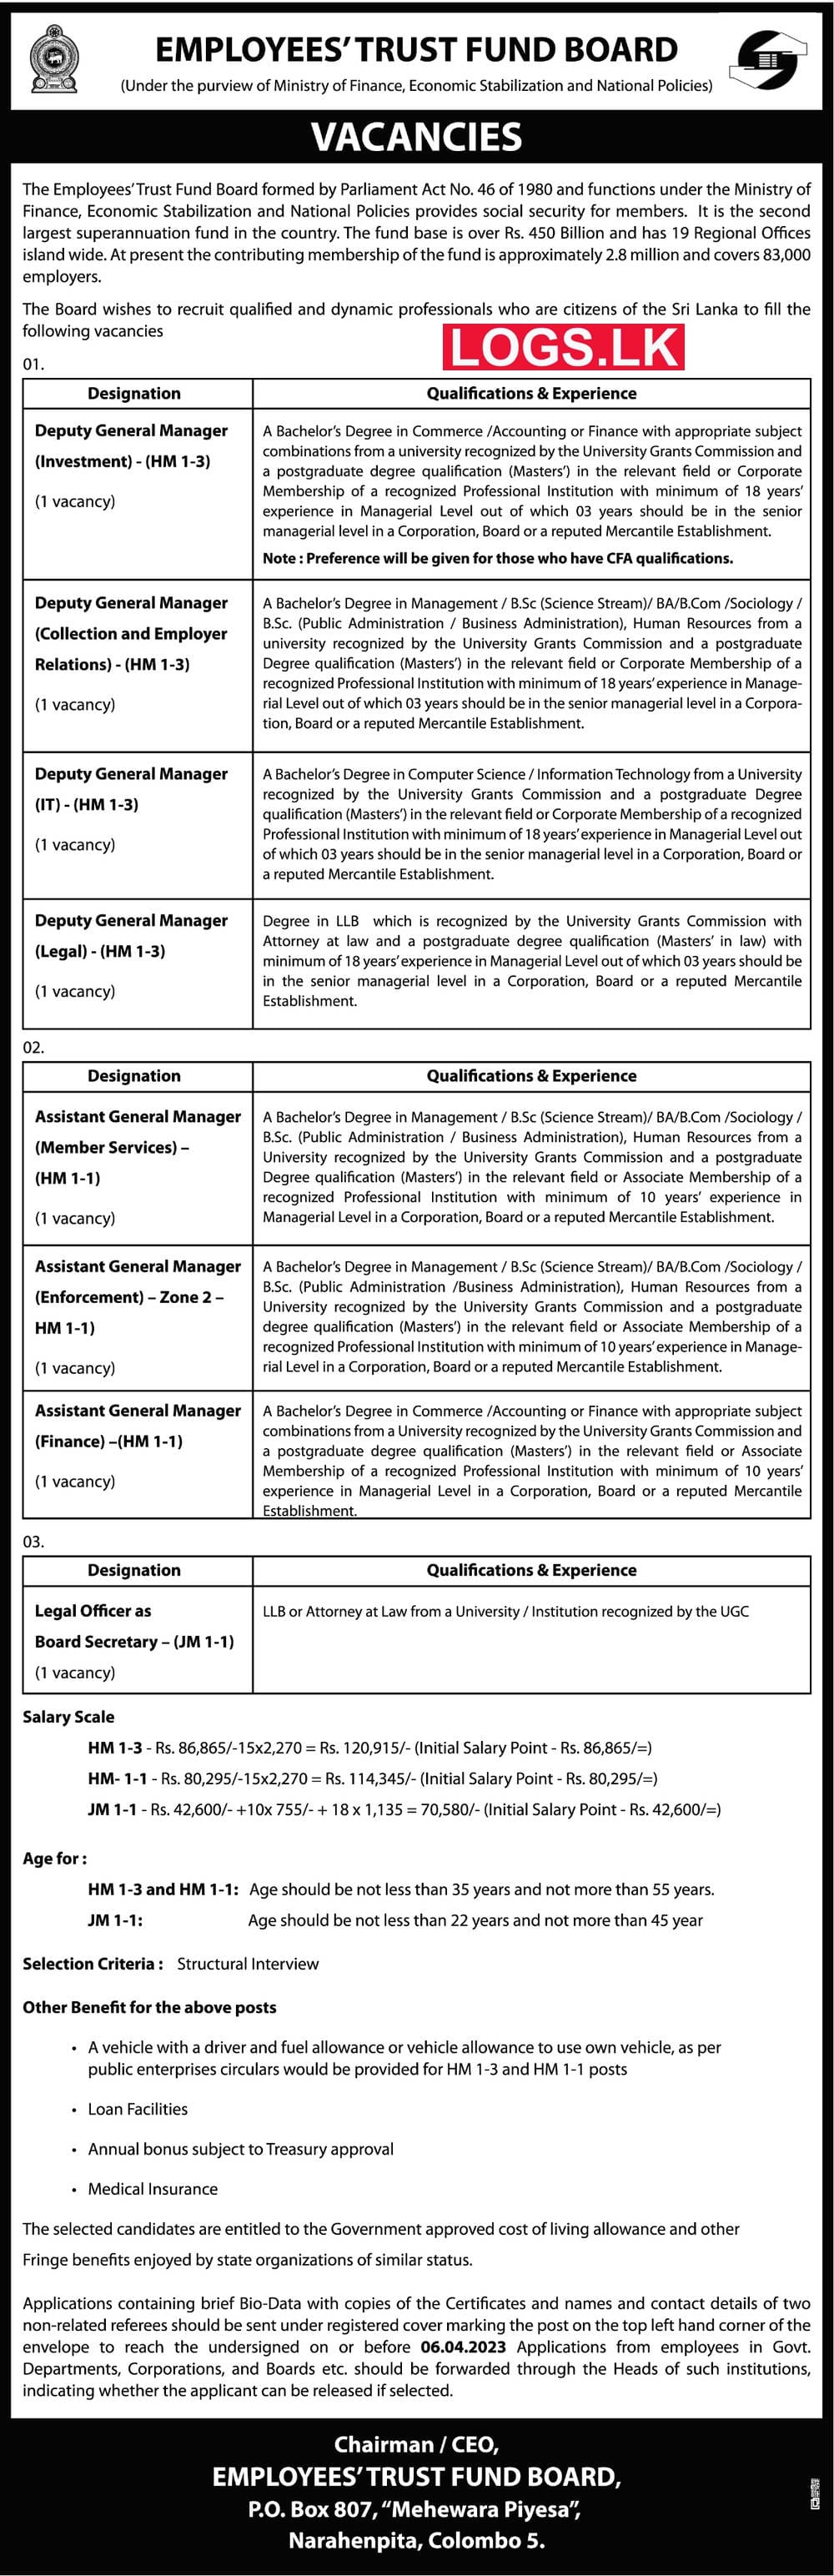 Employees’ Trust Fund Board Job Vacancies 2023 Application, Details for Deputy General Manager, Assistant General Manager, Legal Officer Jobs